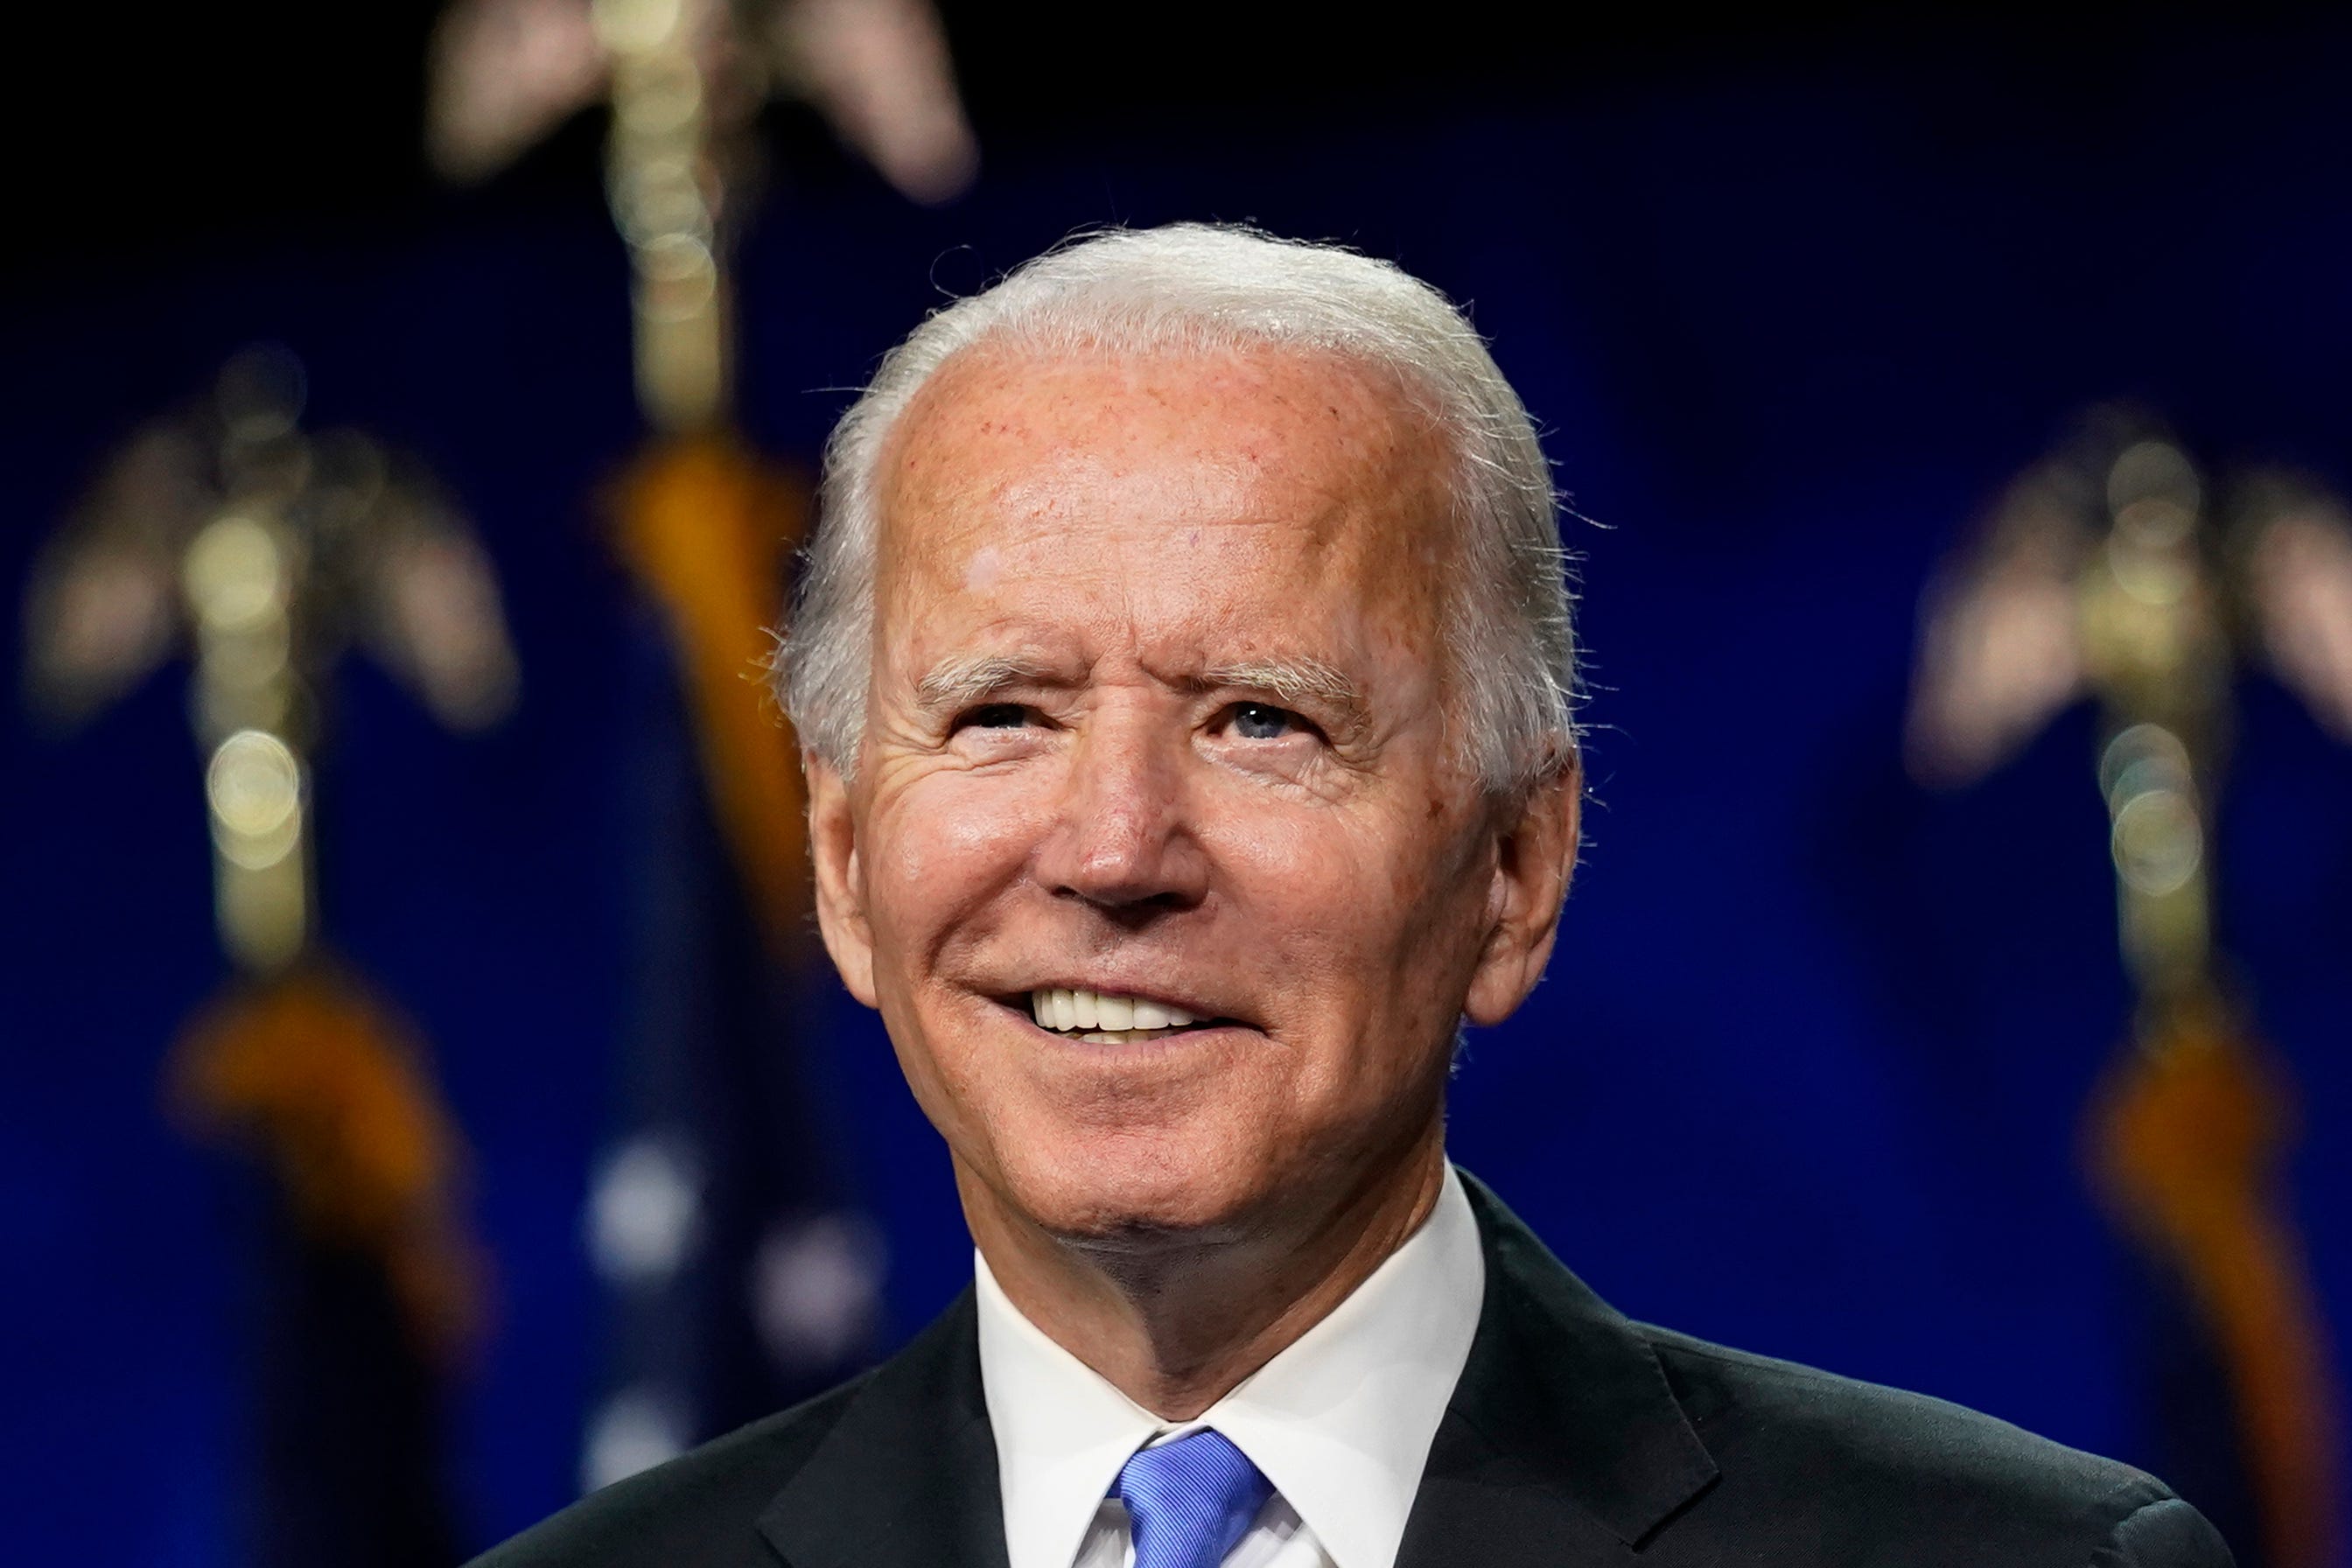 joe biden obama today - Biden|President|Joe|States|Delaware|Obama|Vice|Senate|Campaign|Election|Time|Administration|House|Law|People|Years|Family|Year|Trump|School|University|Senator|Office|Party|Country|Committee|Act|War|Days|Climate|Hunter|Health|America|State|Day|Democrats|Americans|Documents|Care|Plan|United States|Vice President|White House|Joe Biden|Biden Administration|Democratic Party|Law School|Presidential Election|President Joe Biden|Executive Orders|Foreign Relations Committee|Presidential Campaign|Second Term|47Th Vice President|Syracuse University|Climate Change|Hillary Clinton|Last Year|Barack Obama|Joseph Robinette Biden|U.S. Senator|Health Care|U.S. Senate|Donald Trump|President Trump|President Biden|Federal Register|Judiciary Committee|Presidential Nomination|Presidential Medal